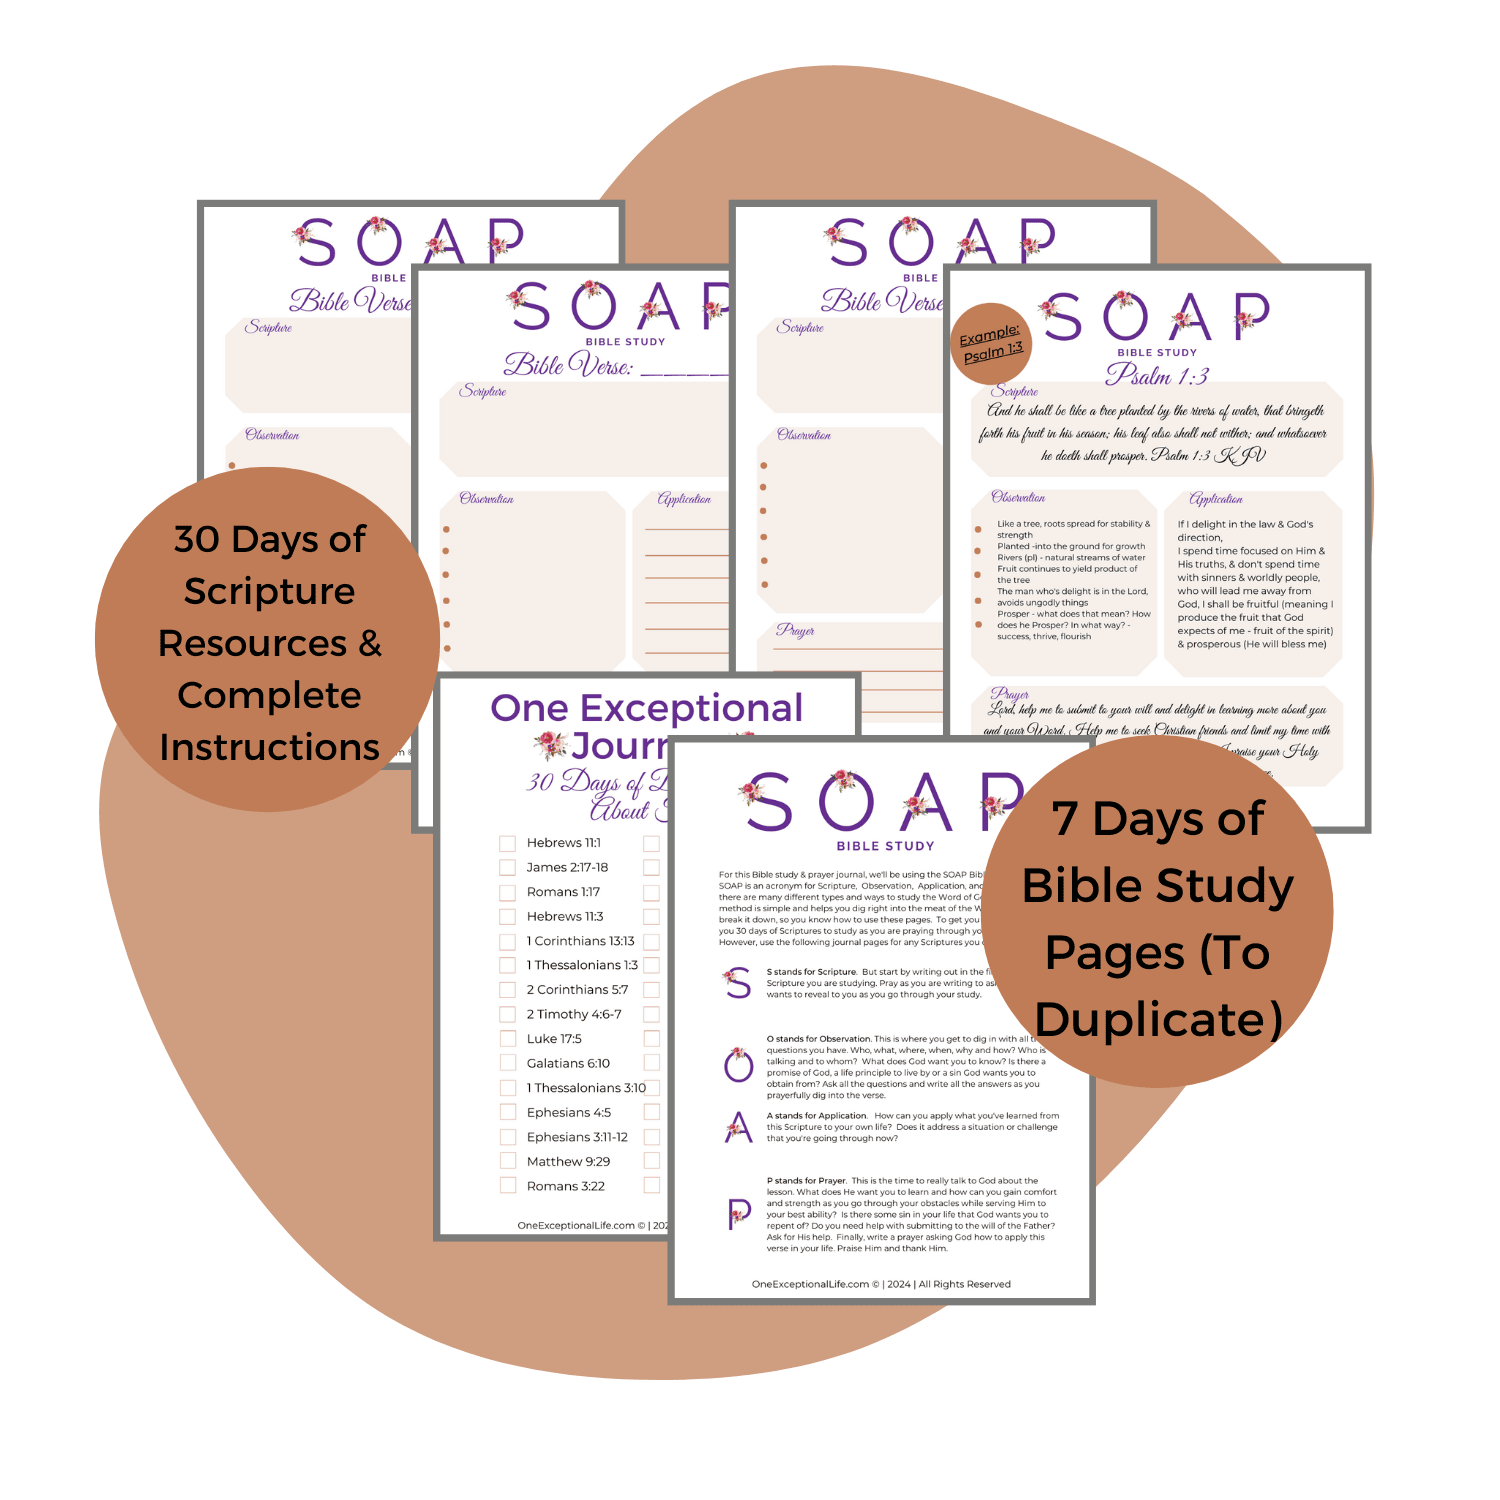 Journey of faith bible study mockup, soap study pages